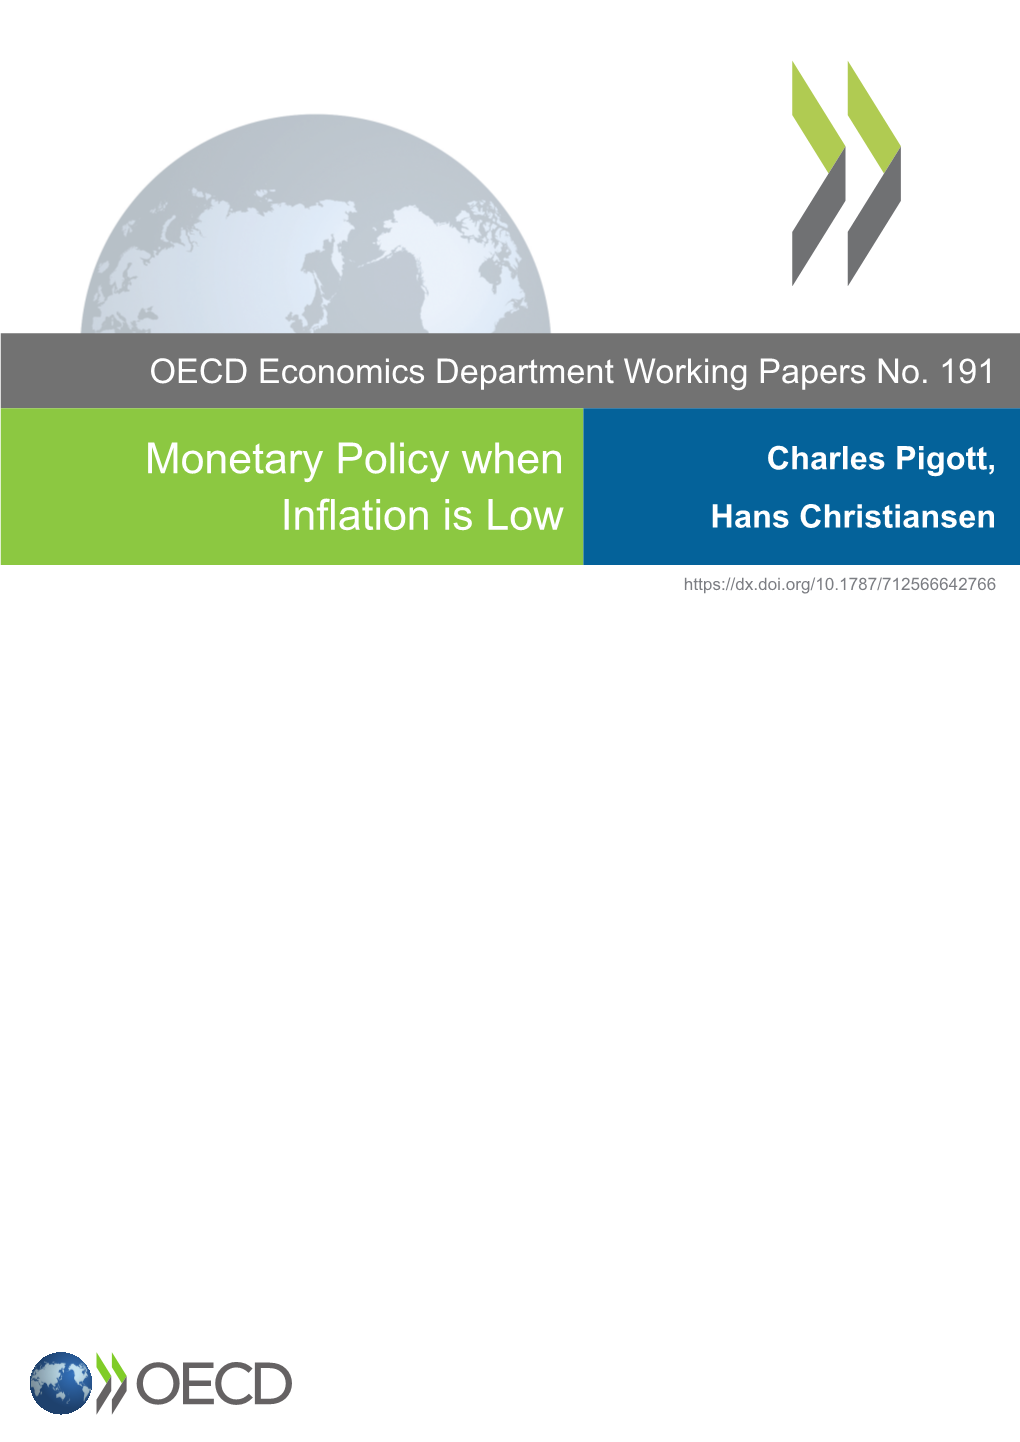 MONETARY POLICY WHEN INFLATION IS LOW : ECONOMICS DEPARTMENT WORKING PAPERS No